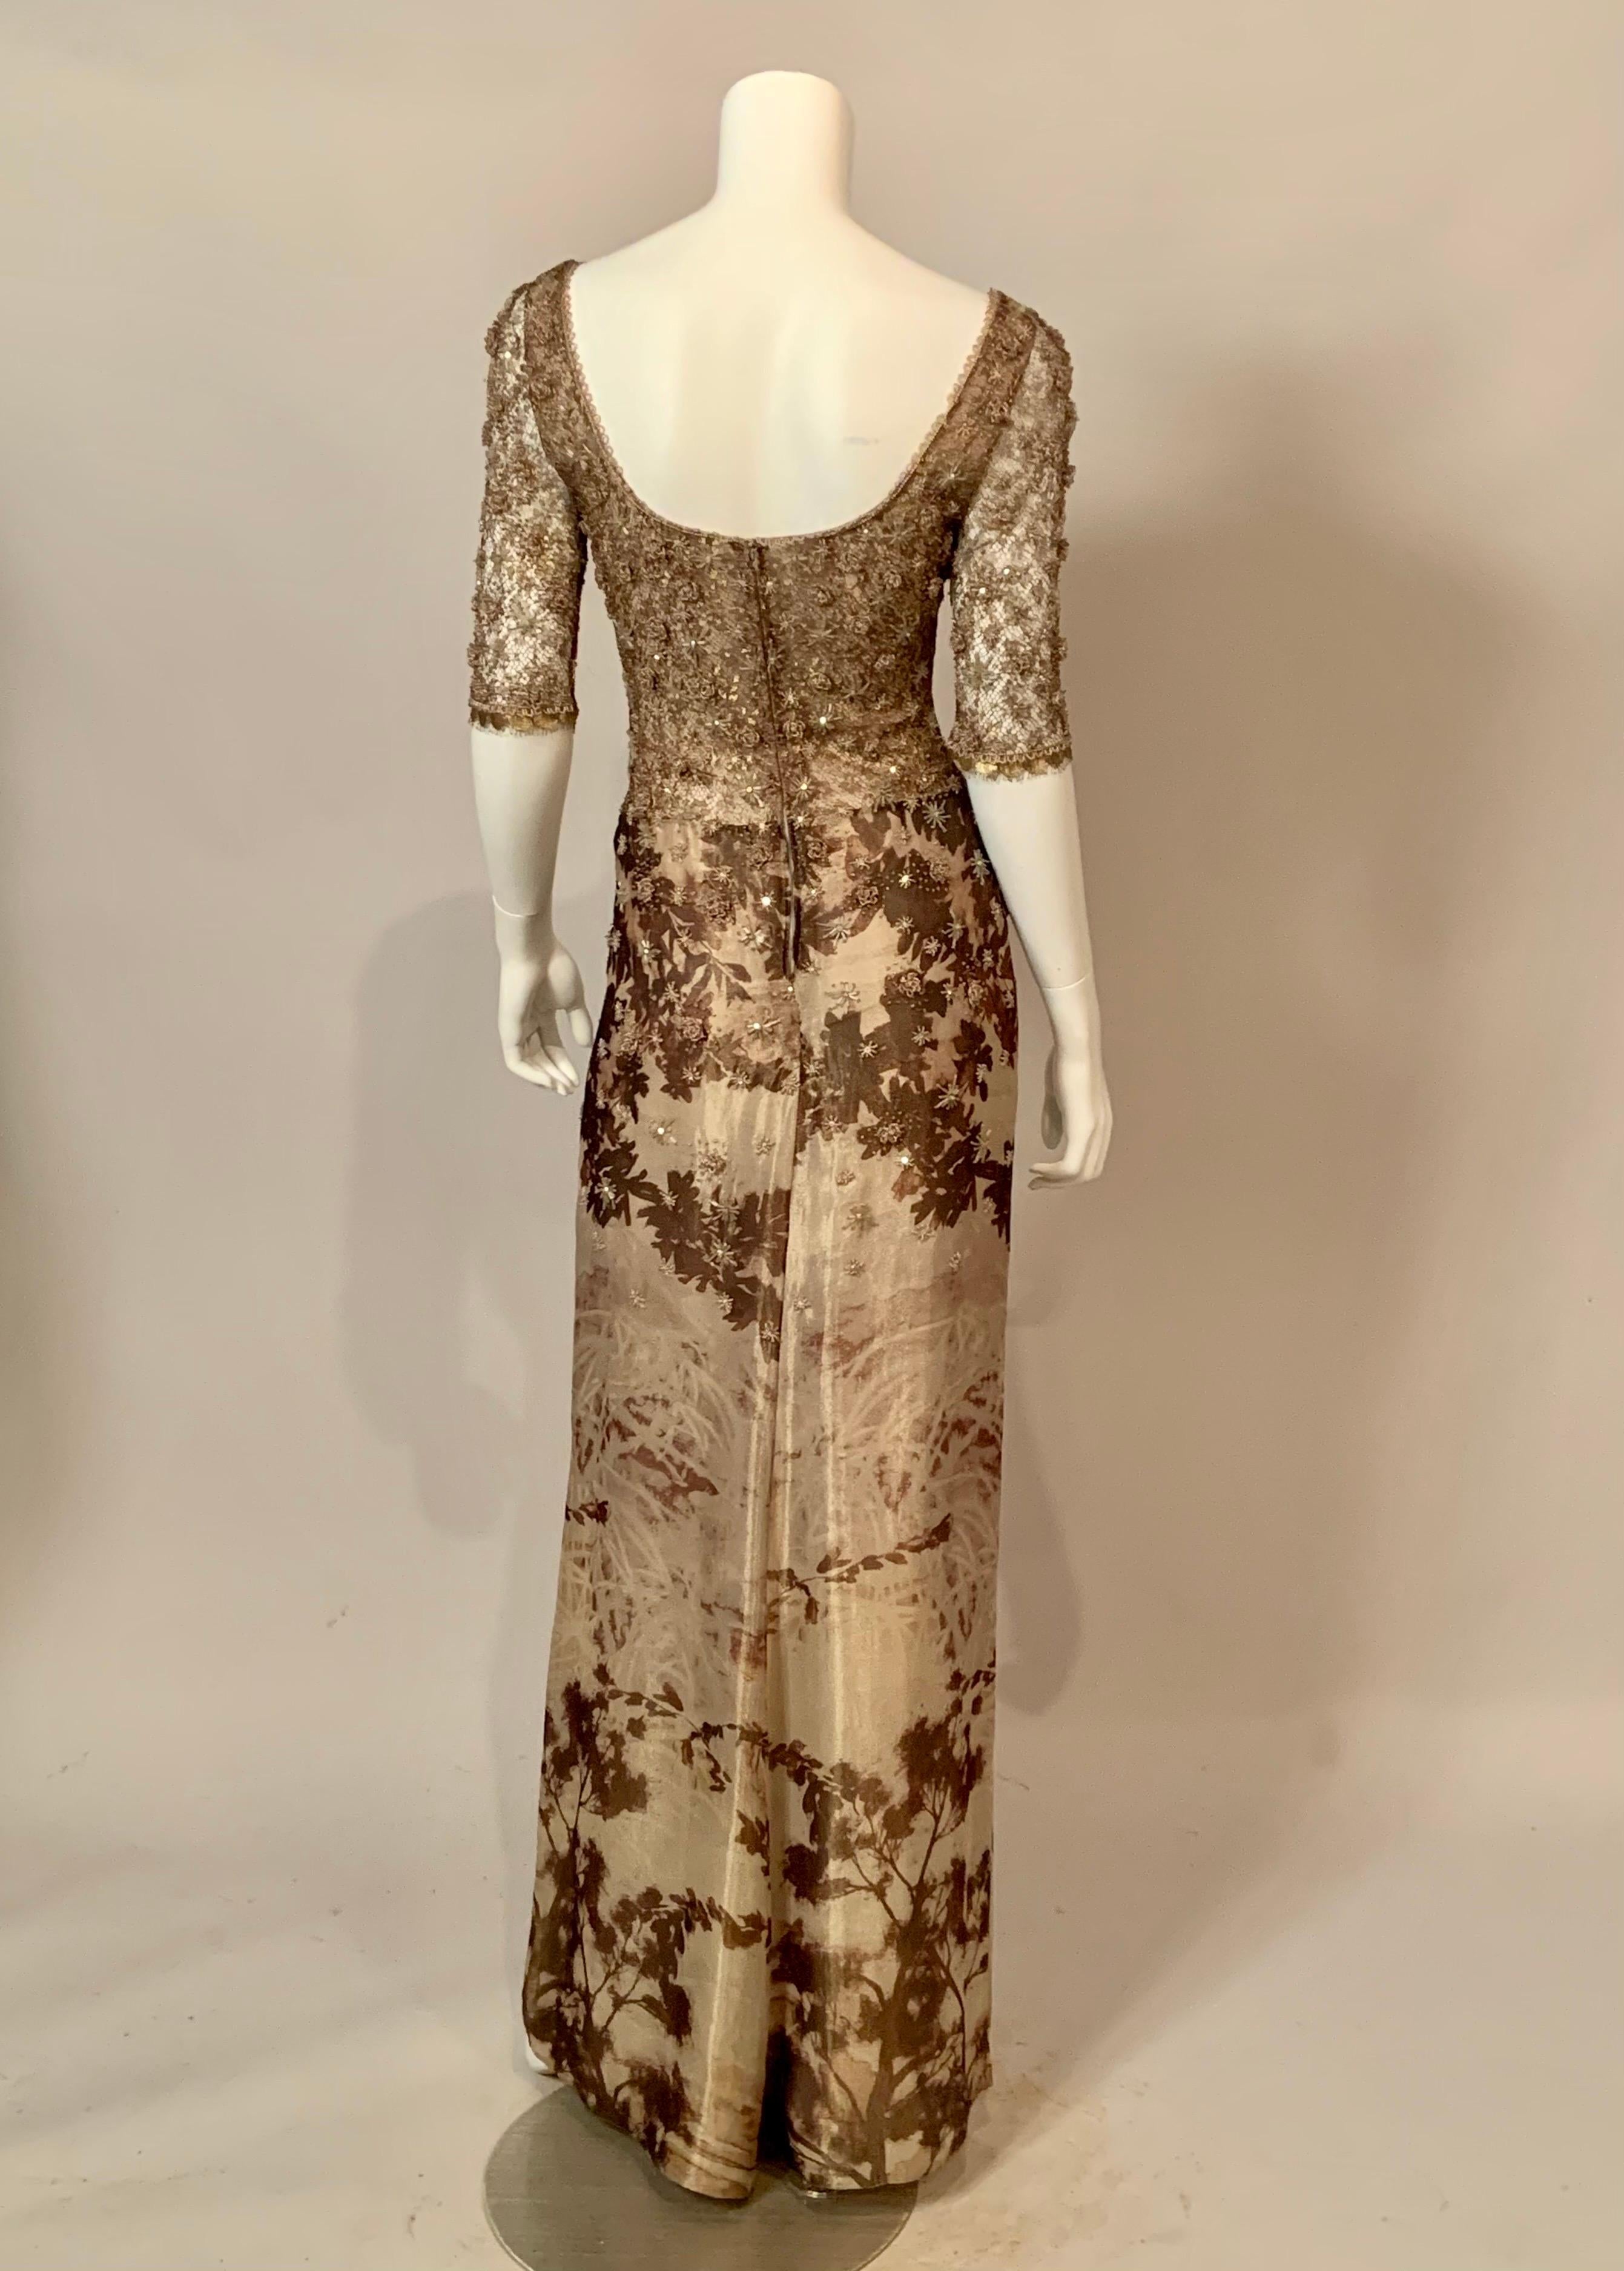 Badgley Mischka Starburst Beaded Gown Gold Lace Top Shimmery Fern Pattern Skirt 5